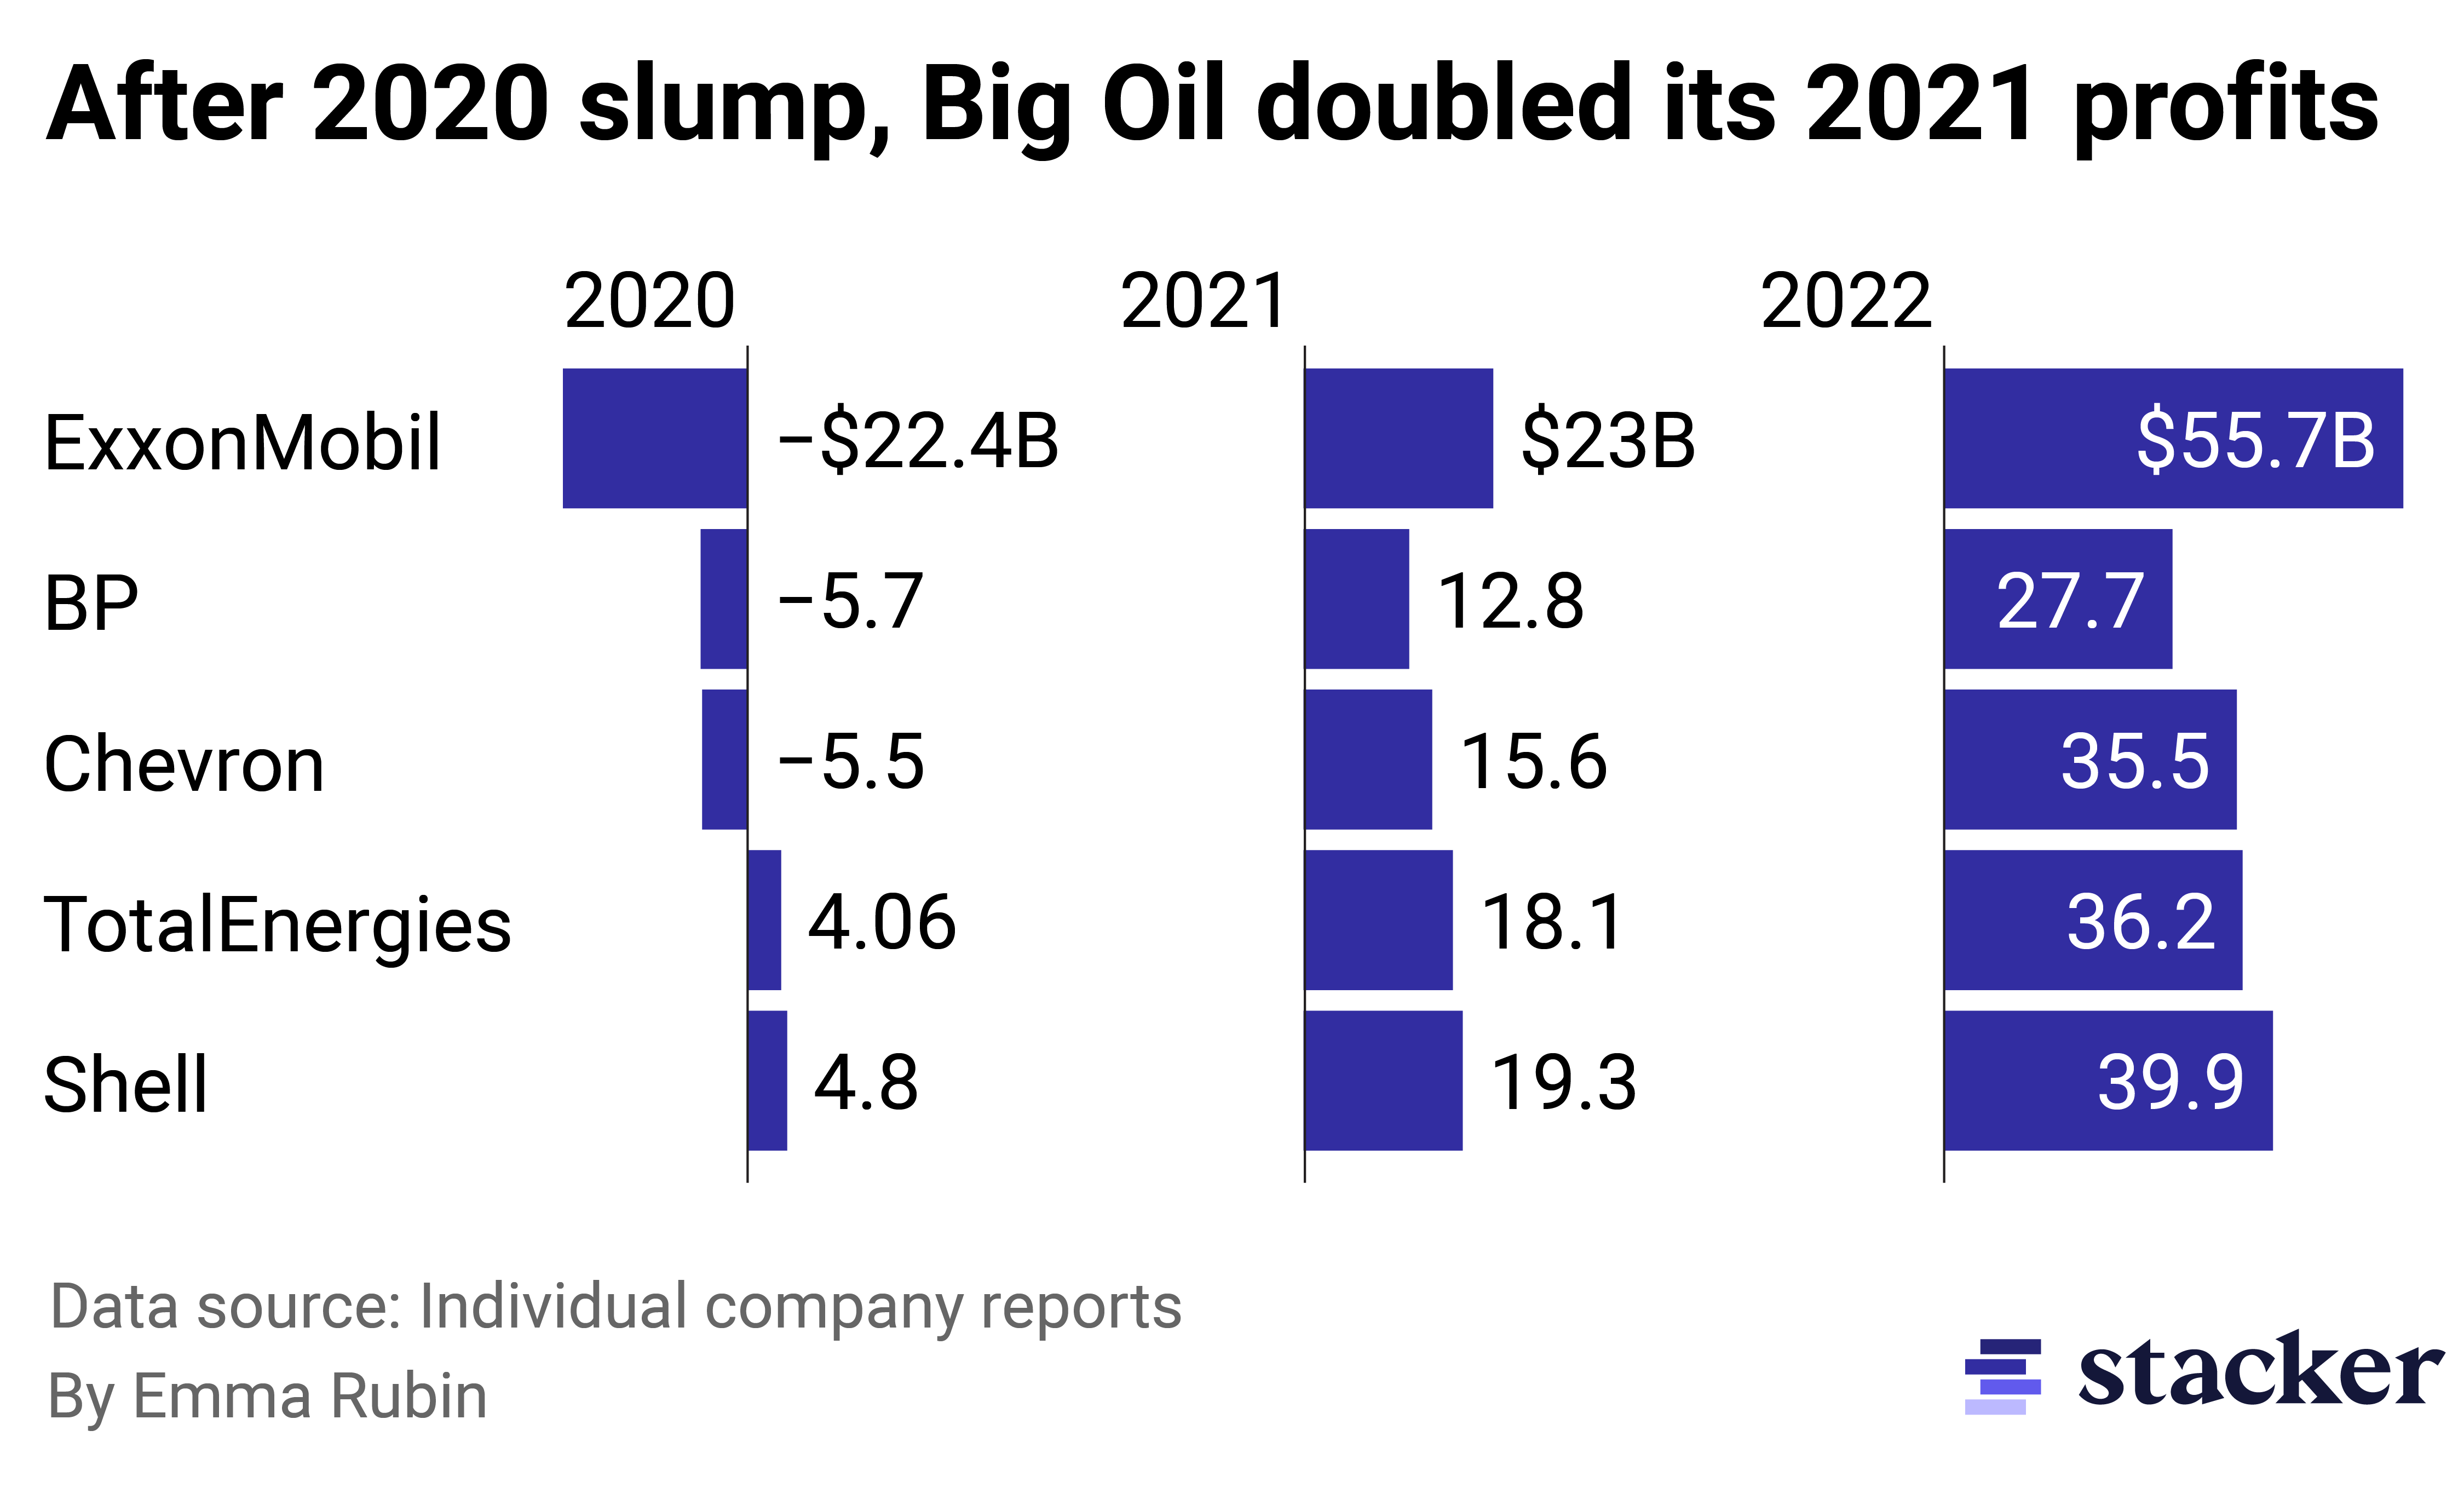 Bar chart showing oil companies' profits for 2020, 2021, and 2022.